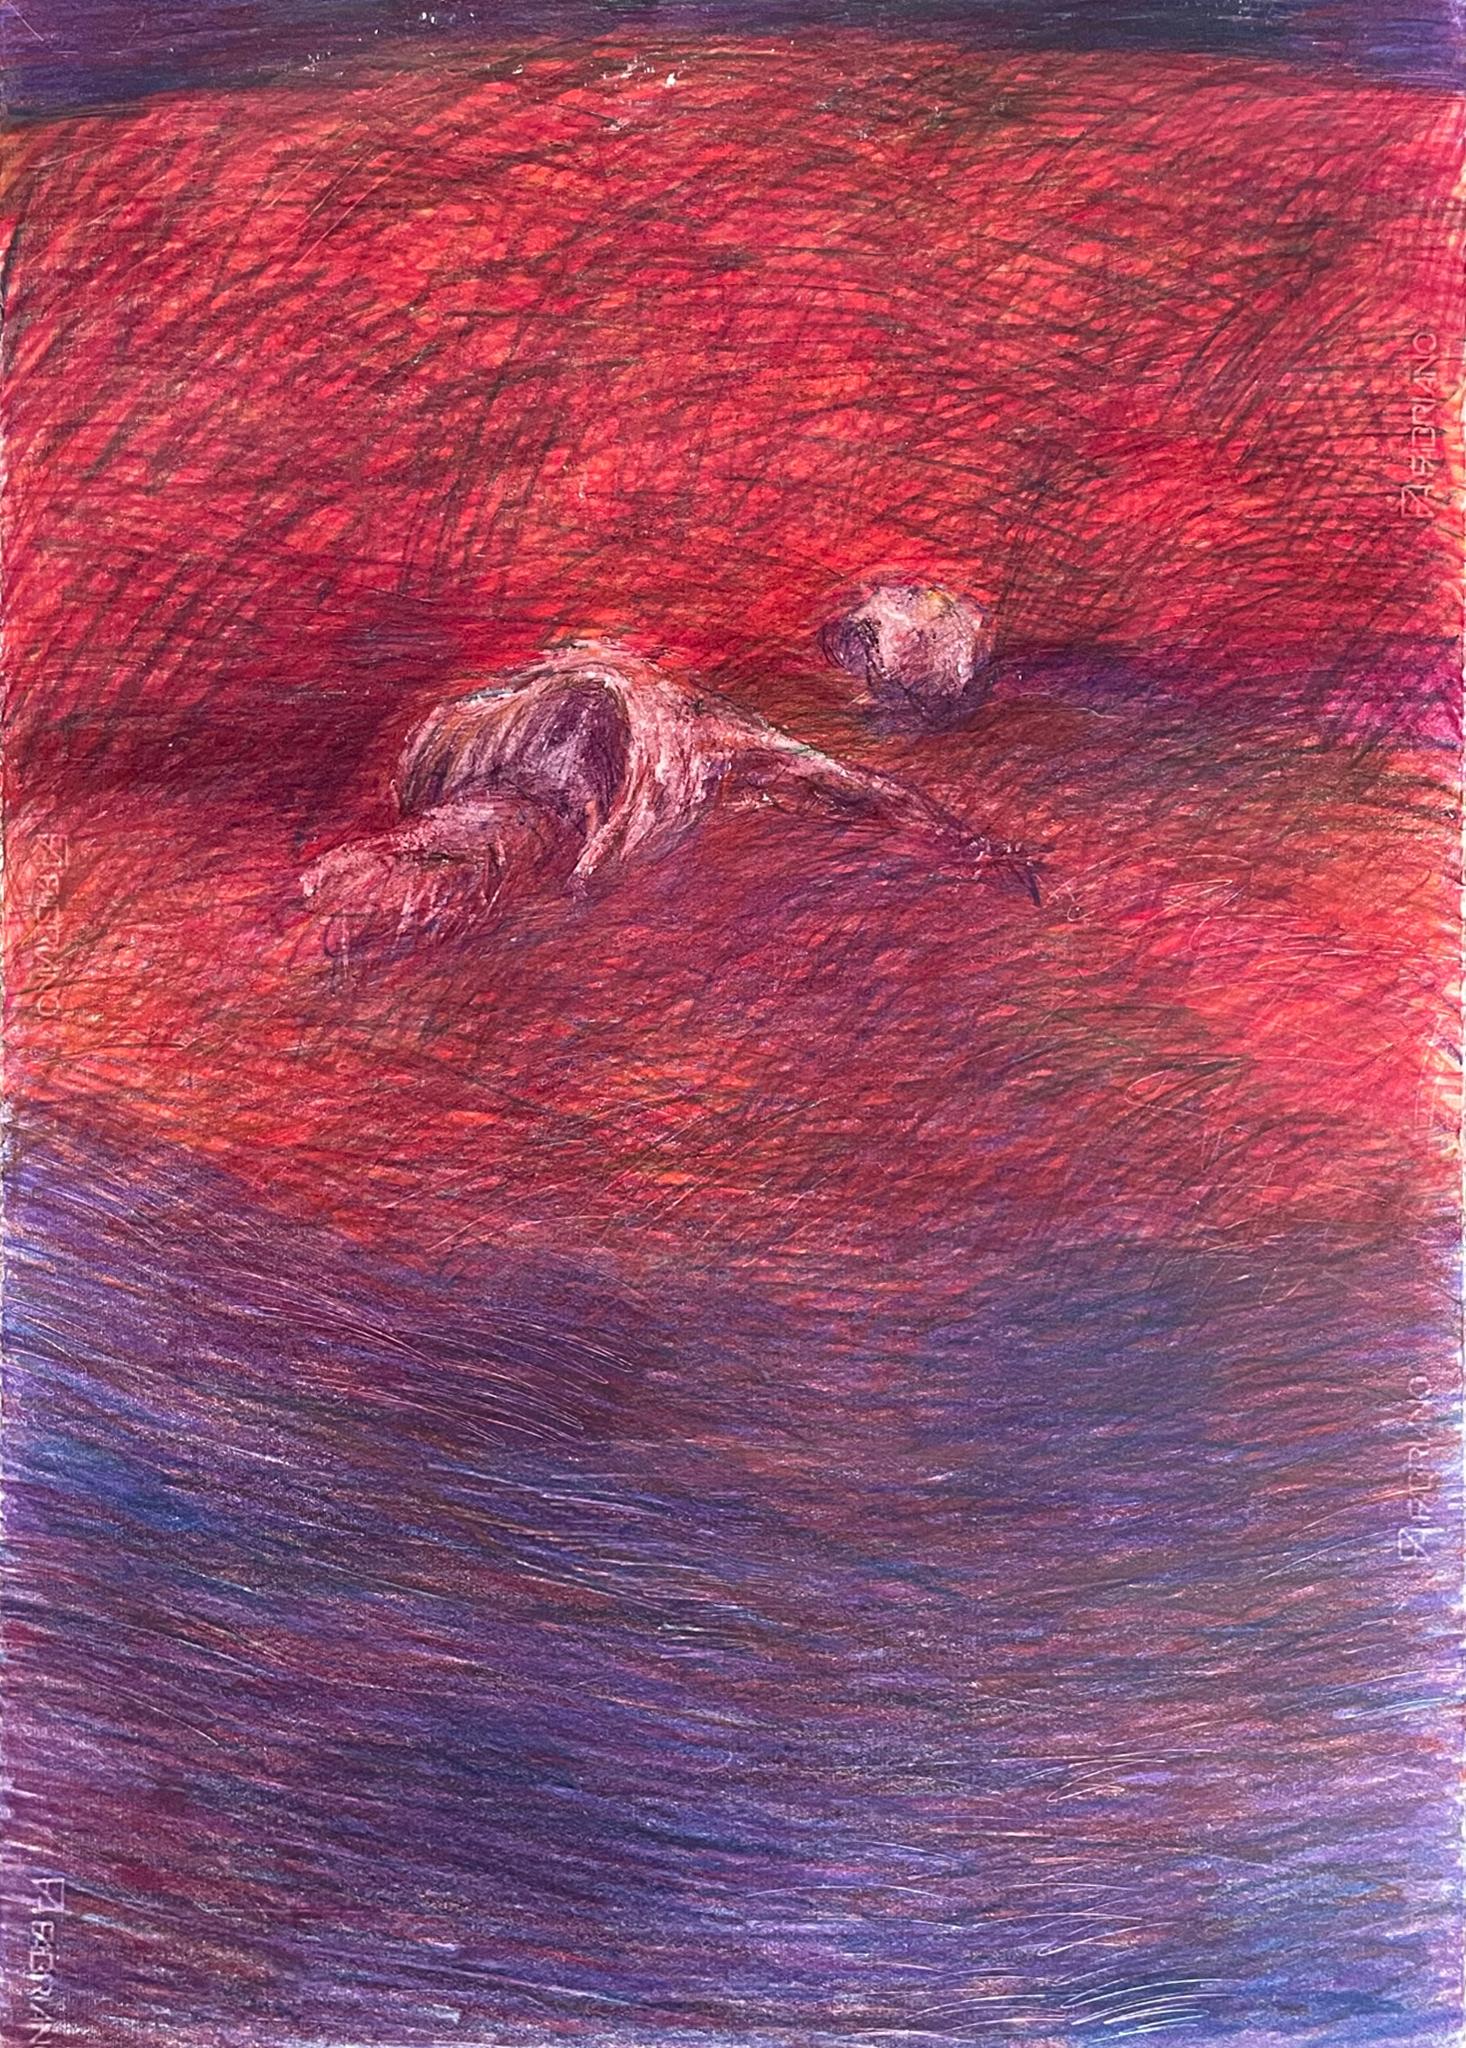 Zsolt Berszán Landscape Art - Untitled_Dead Body on the Field #1 - Red, Contemporary, 21st Century, Drawing